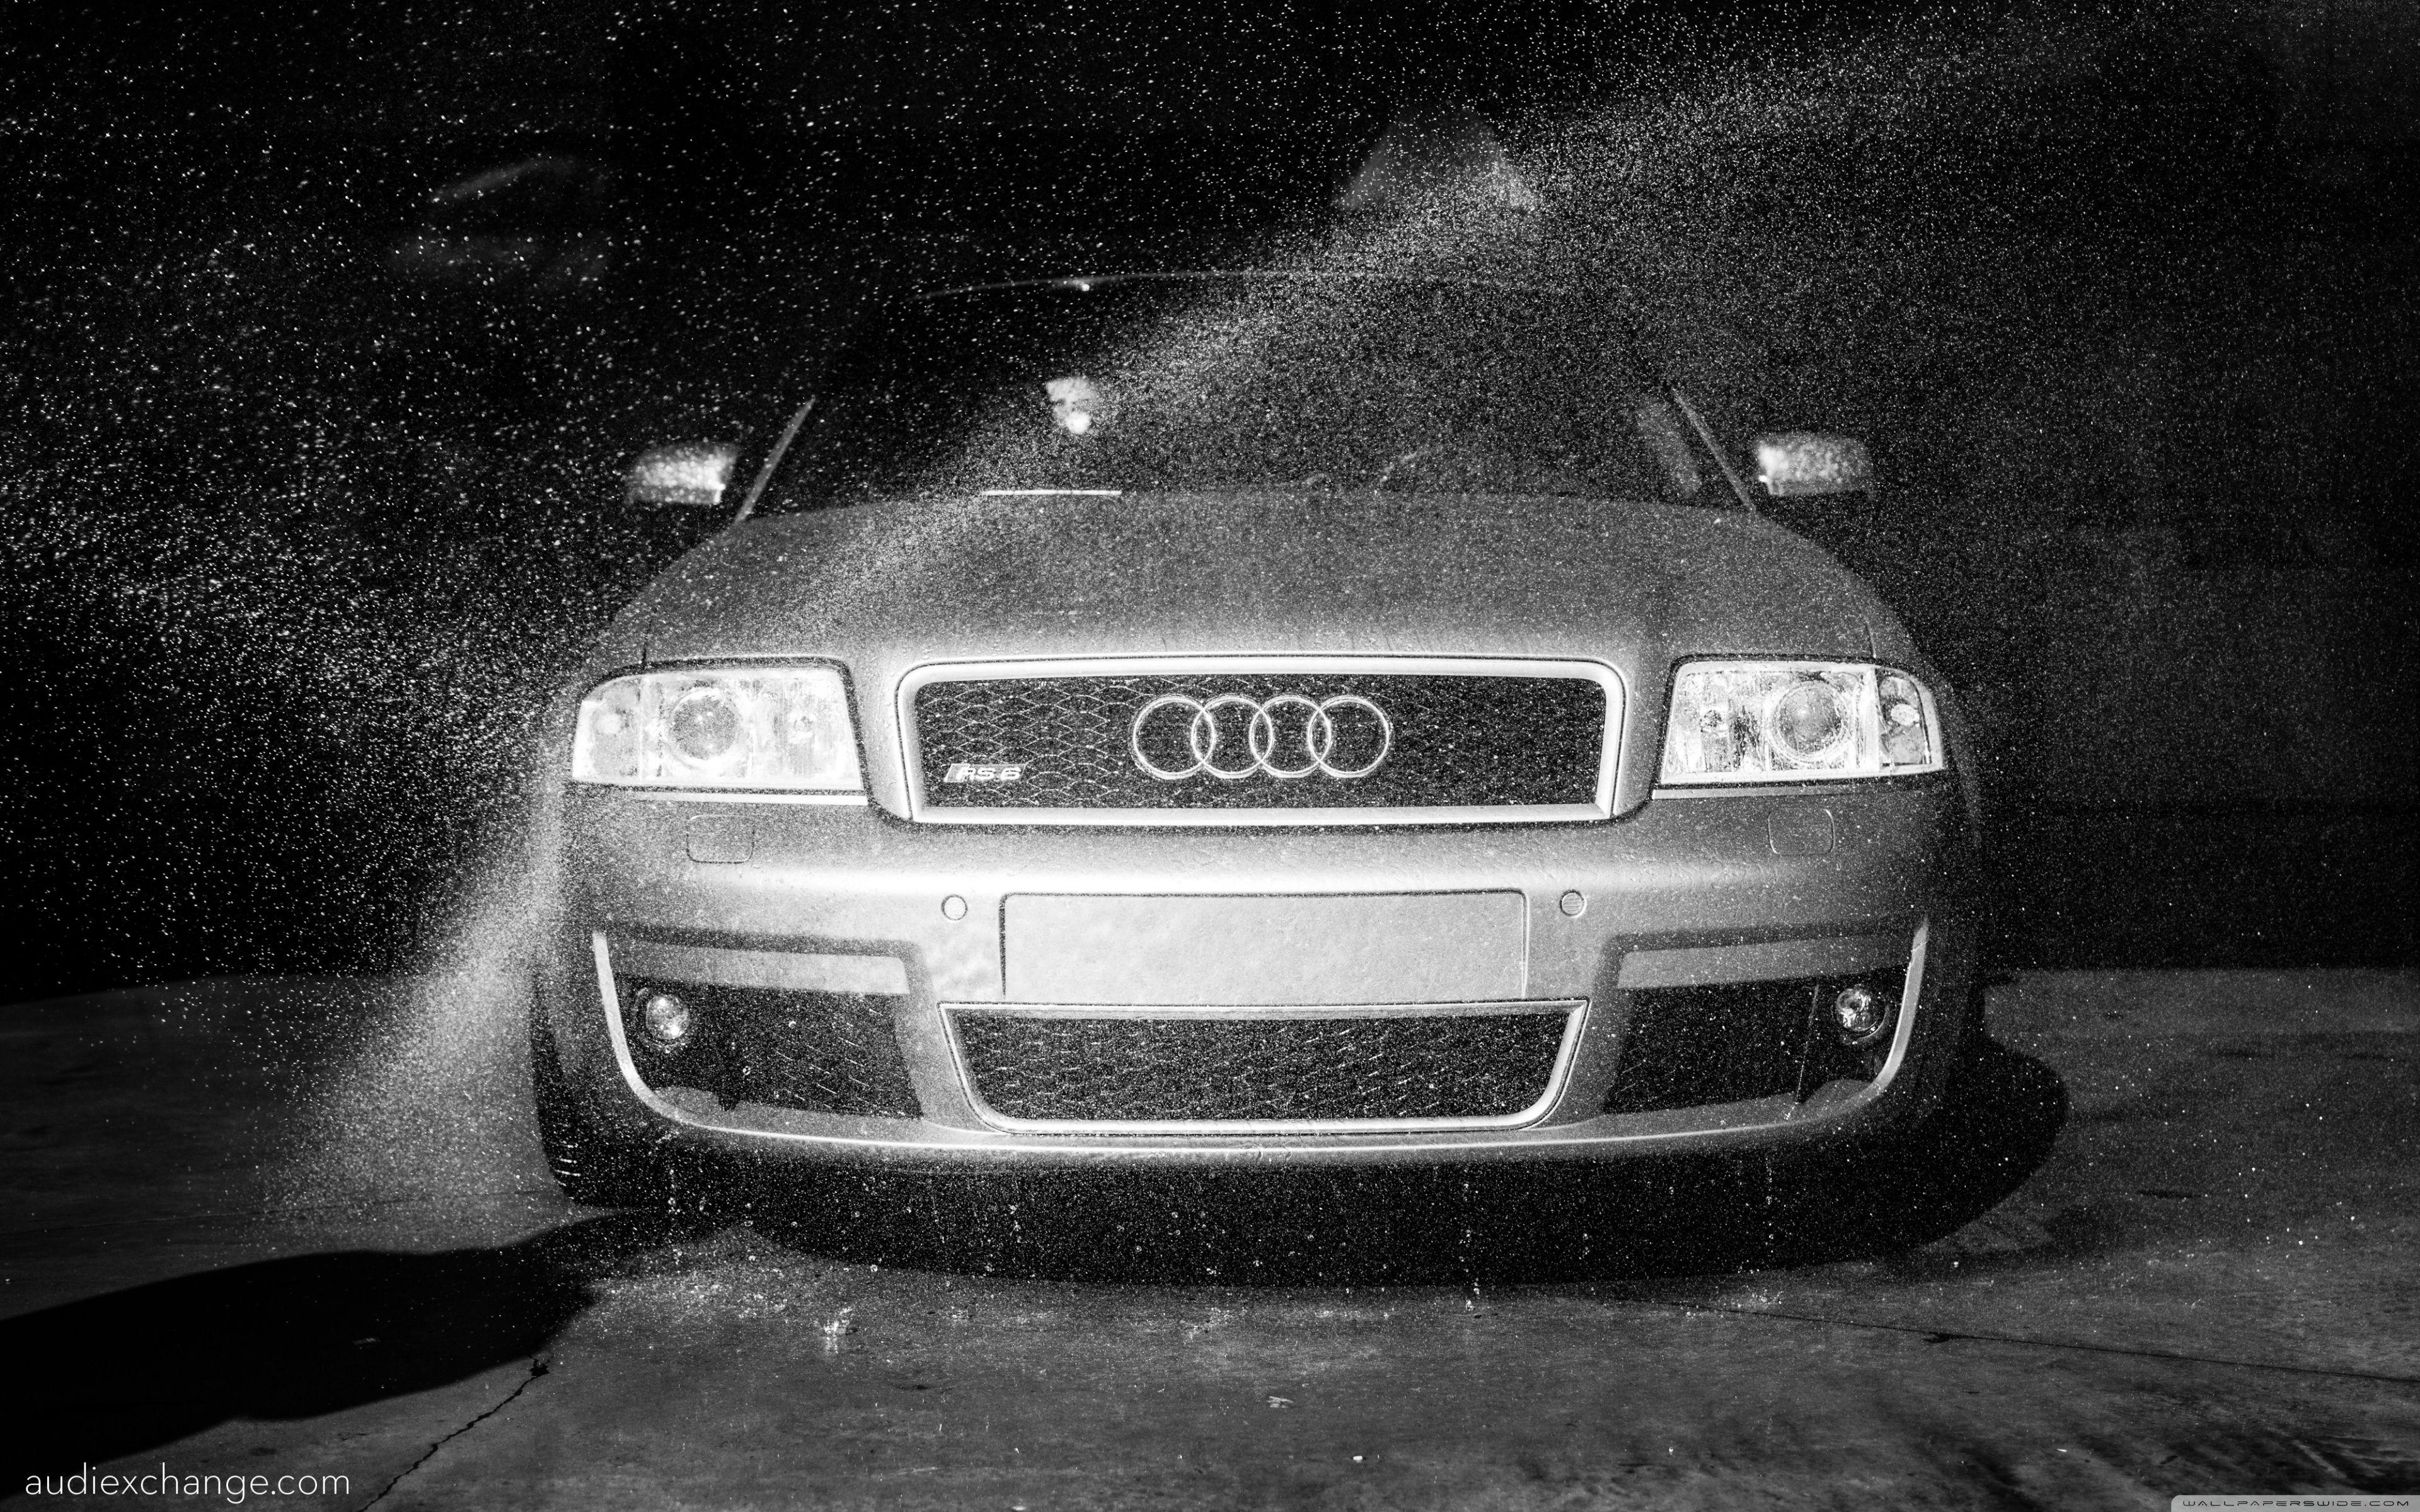 Audi C5 RS6 getting a car wash at the Audi Exchange